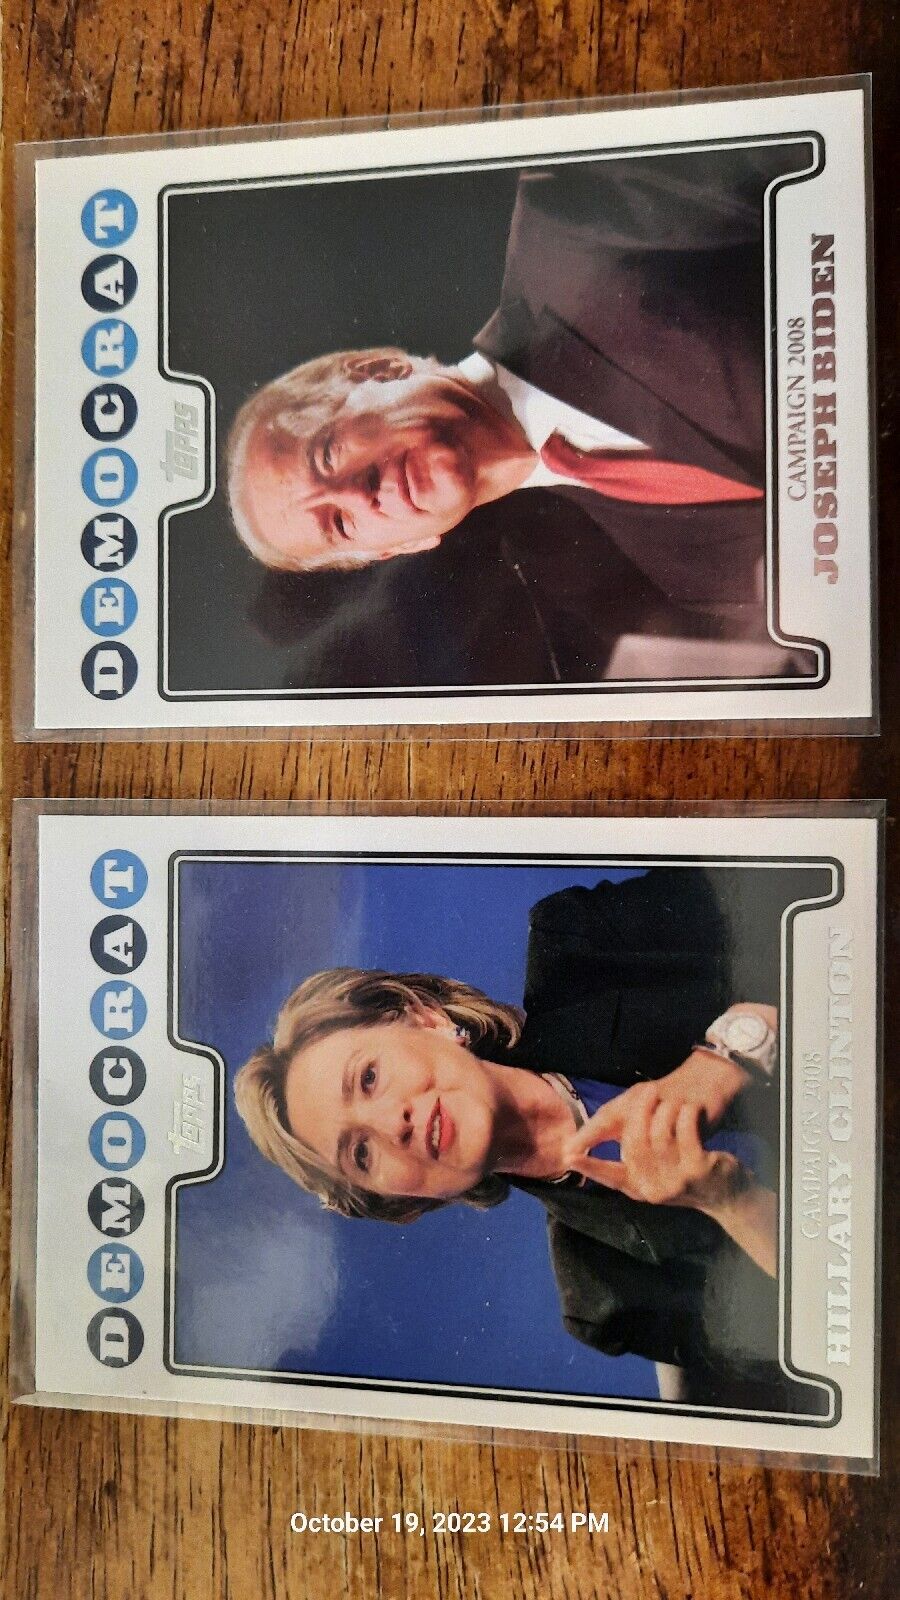 2008 topps campaign Cards Of Joseph  Biden And Hillary Clinton